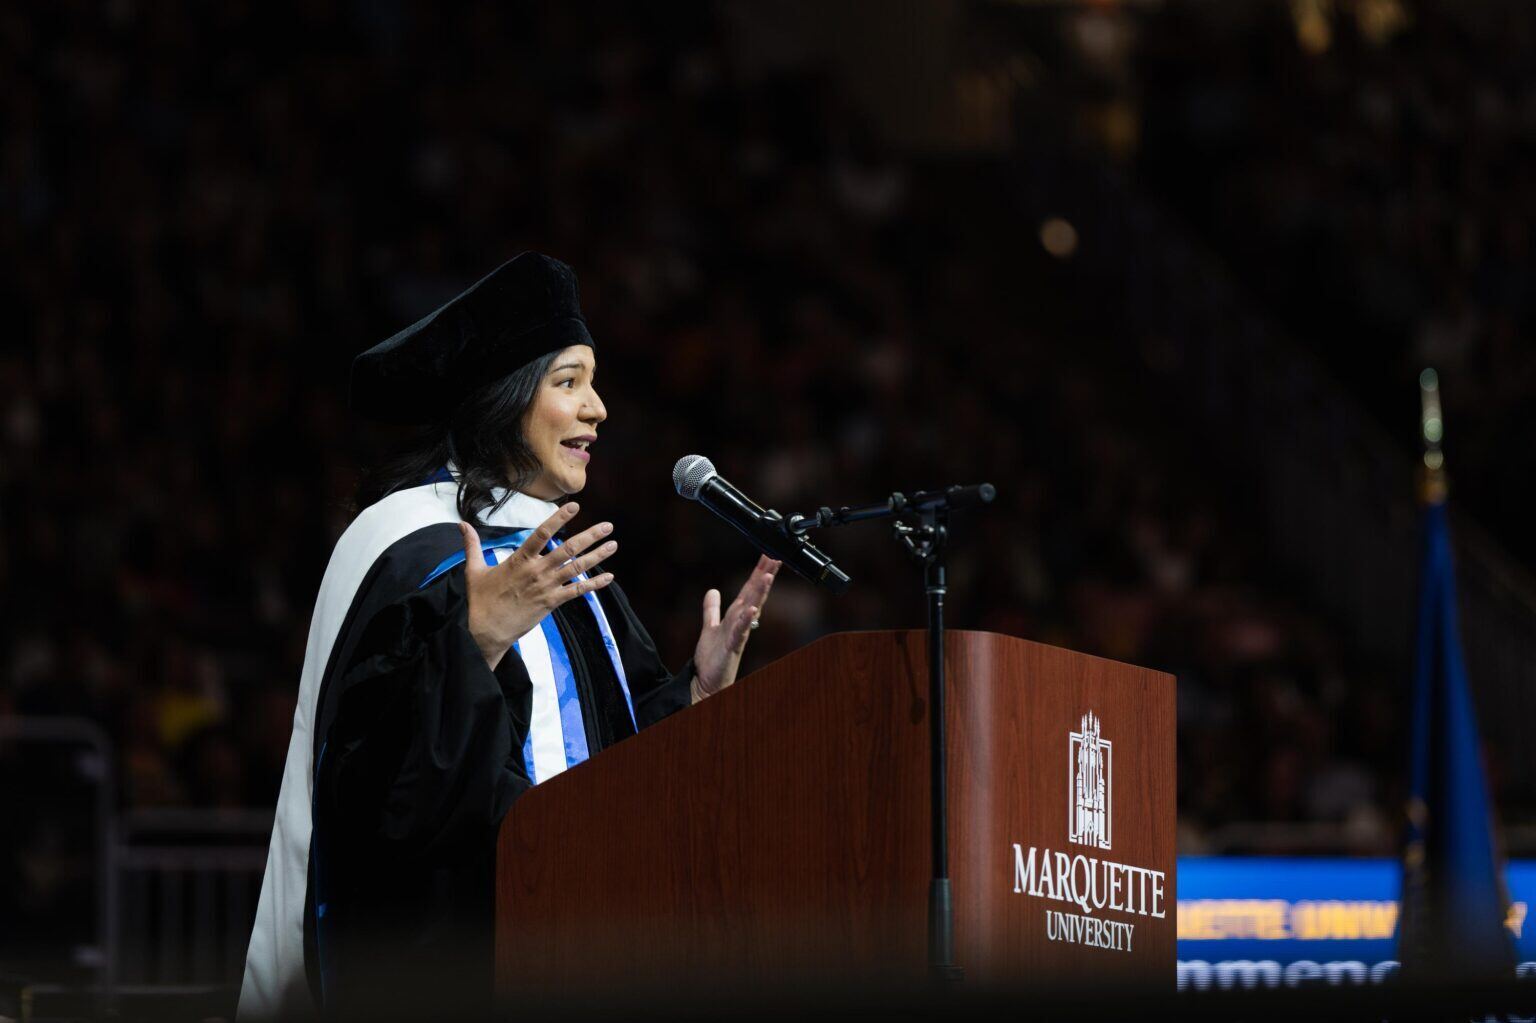 Global Brigades CEO & Co-Founder Dr. Shital Vora Speaks at Marquette University Commencement